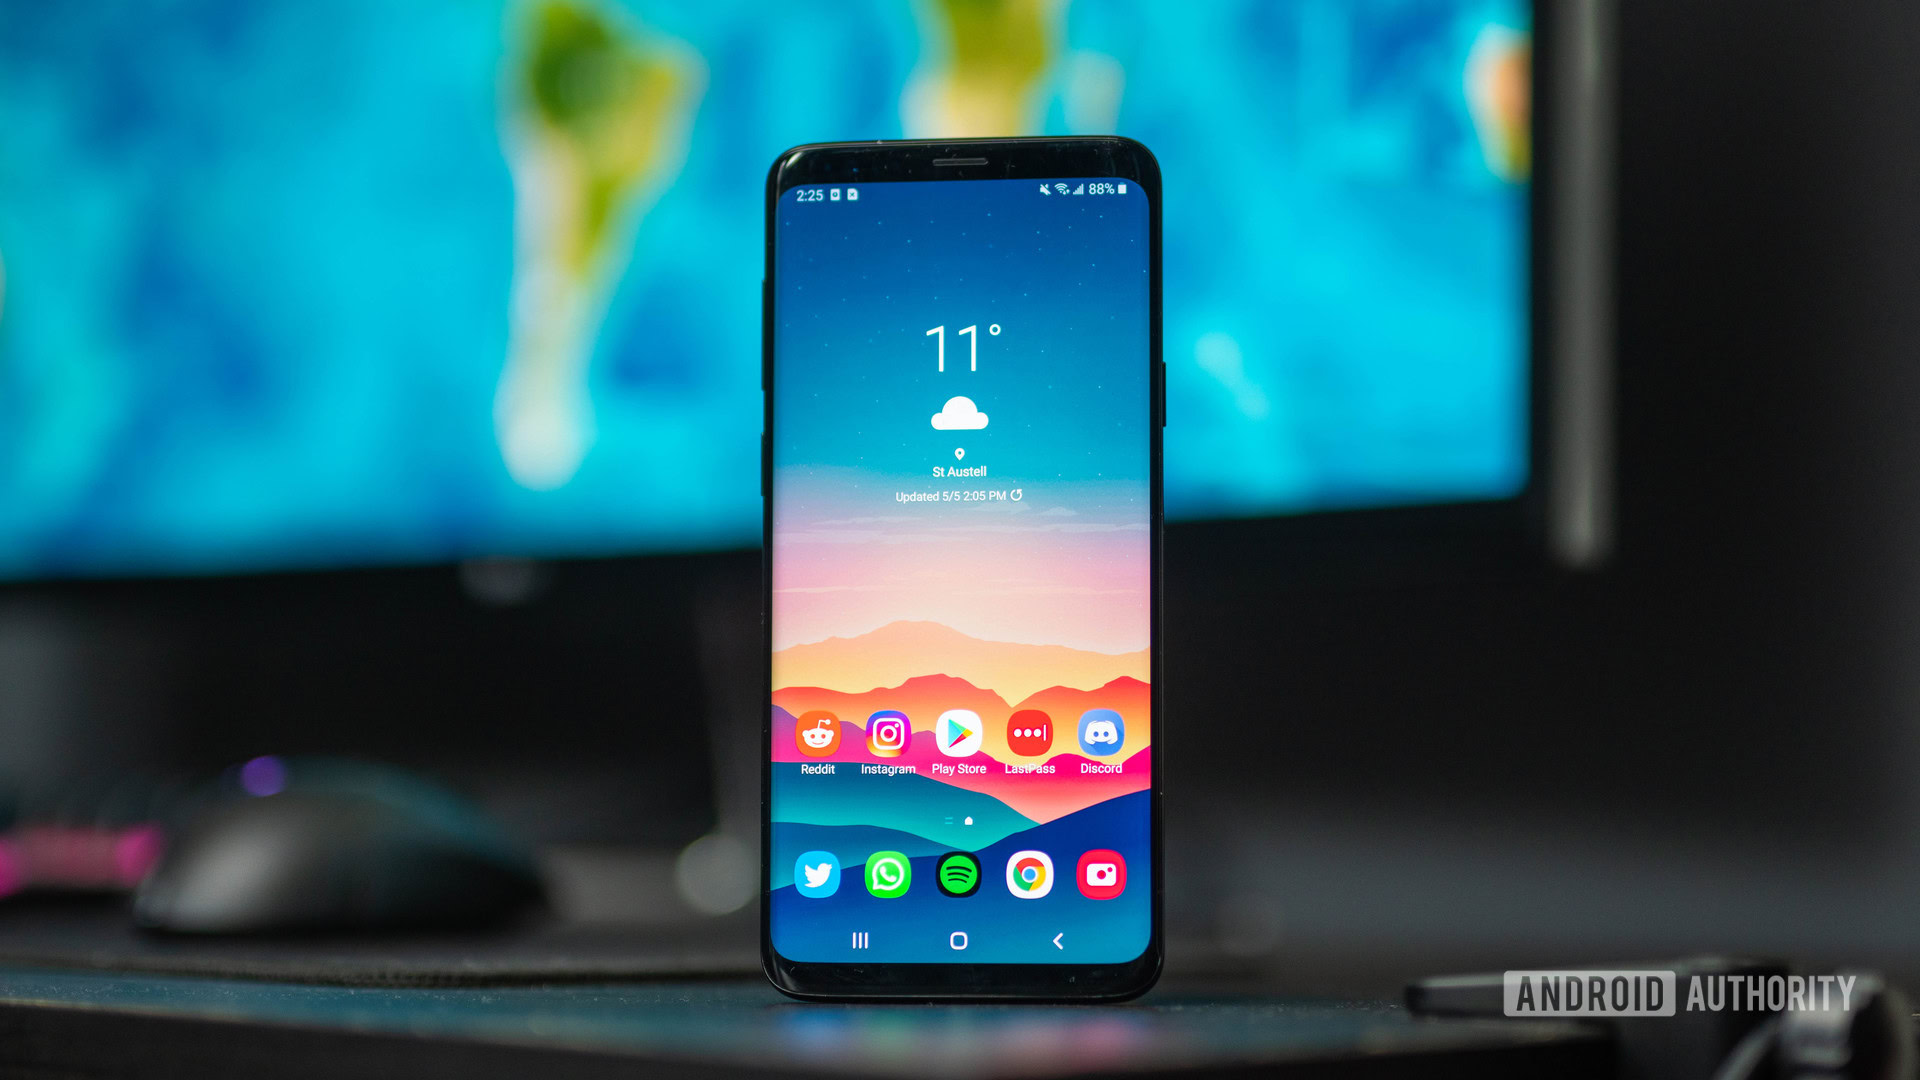 Samsung Galaxy S10 Vs Galaxy S9: What's The Difference?